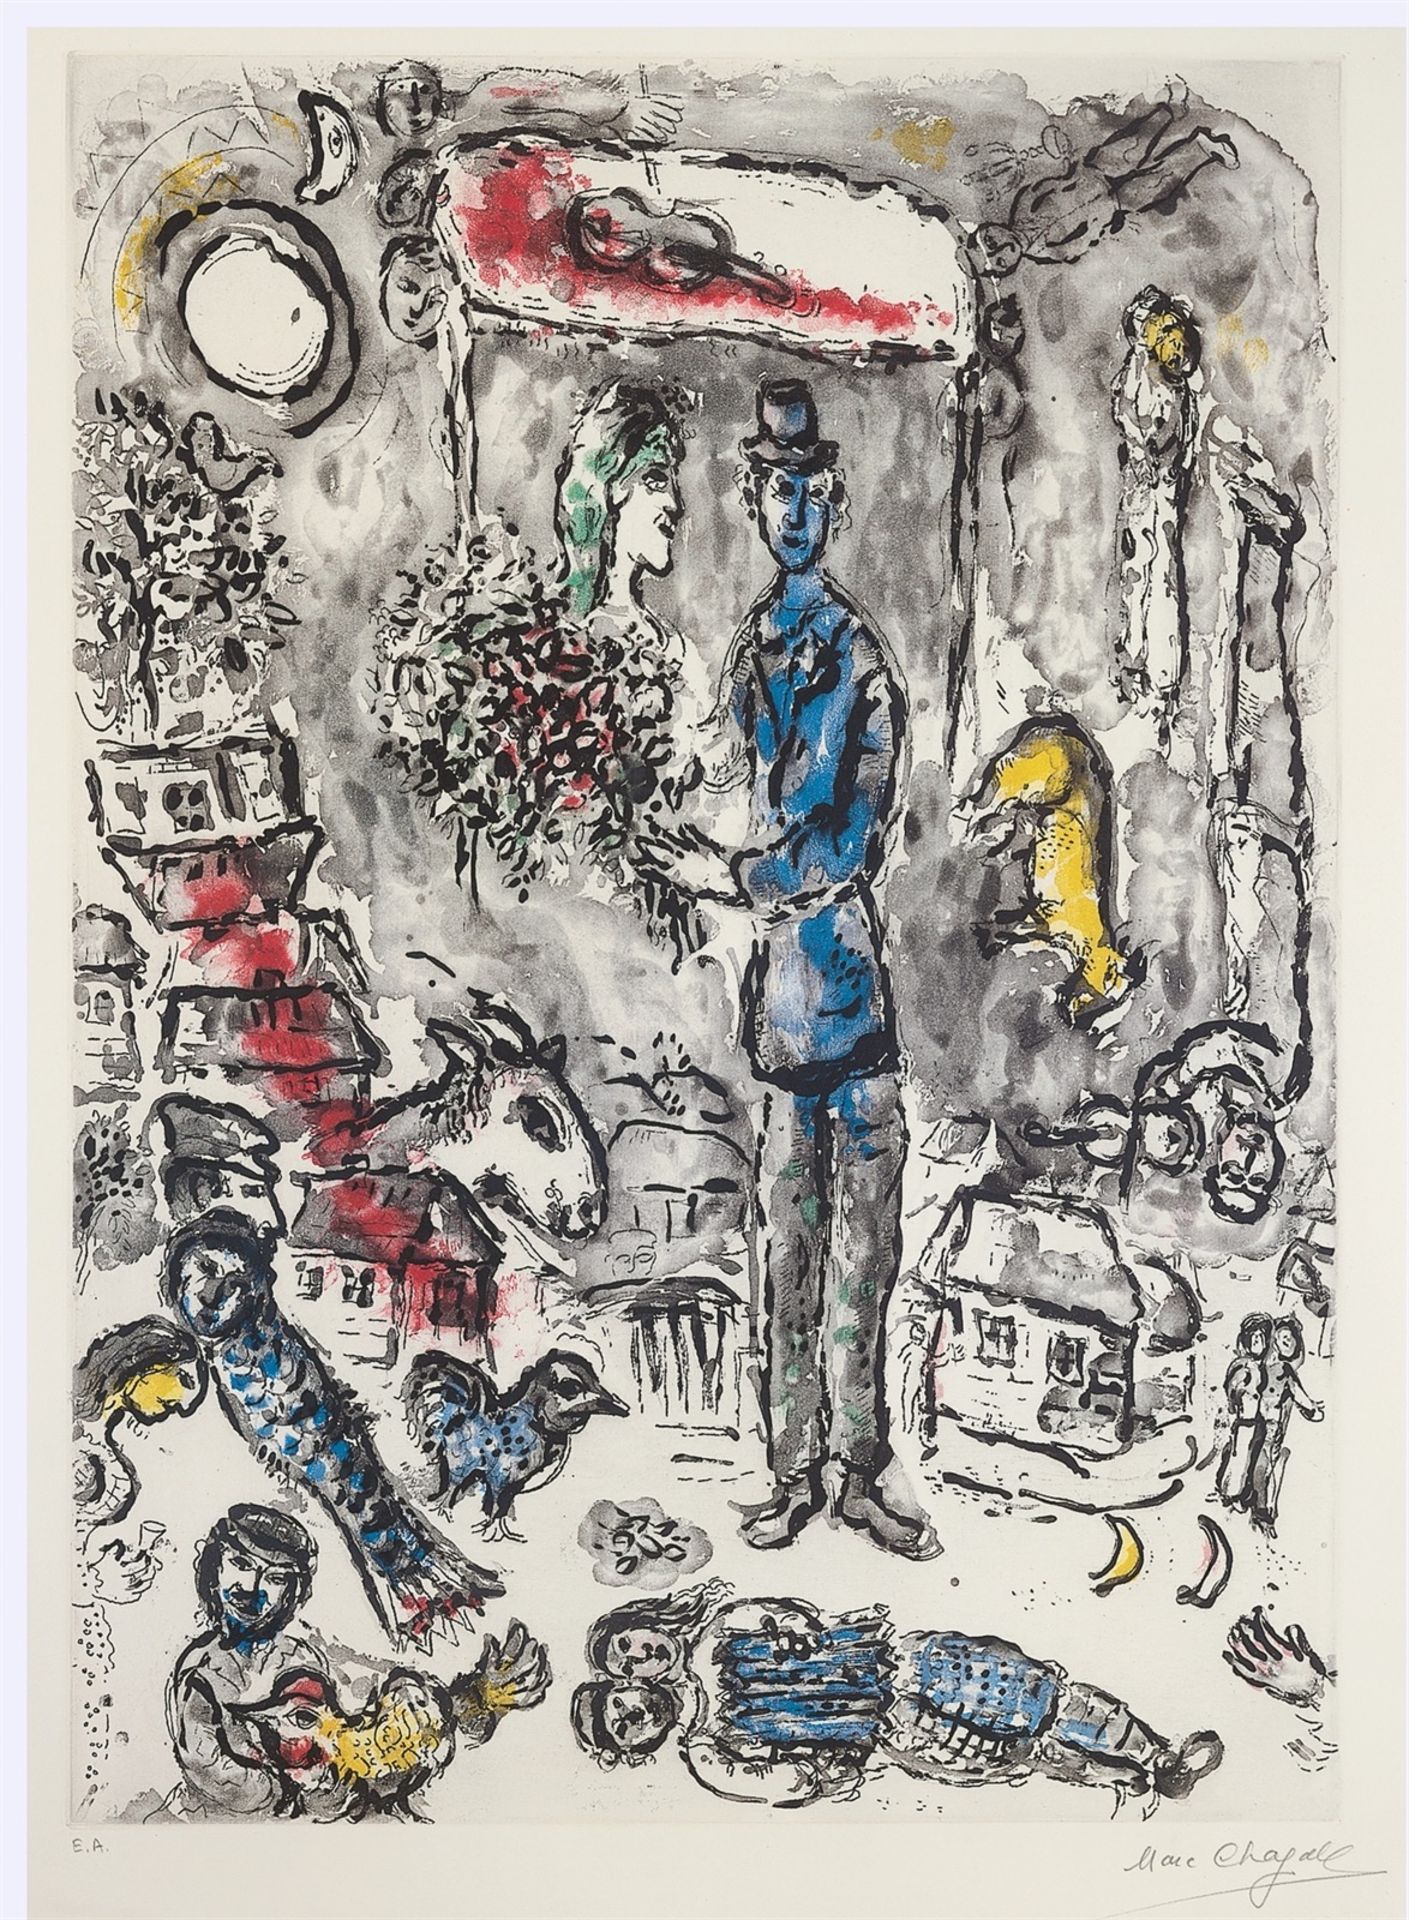 Marc Chagall. ”Le Mariage”. 1968